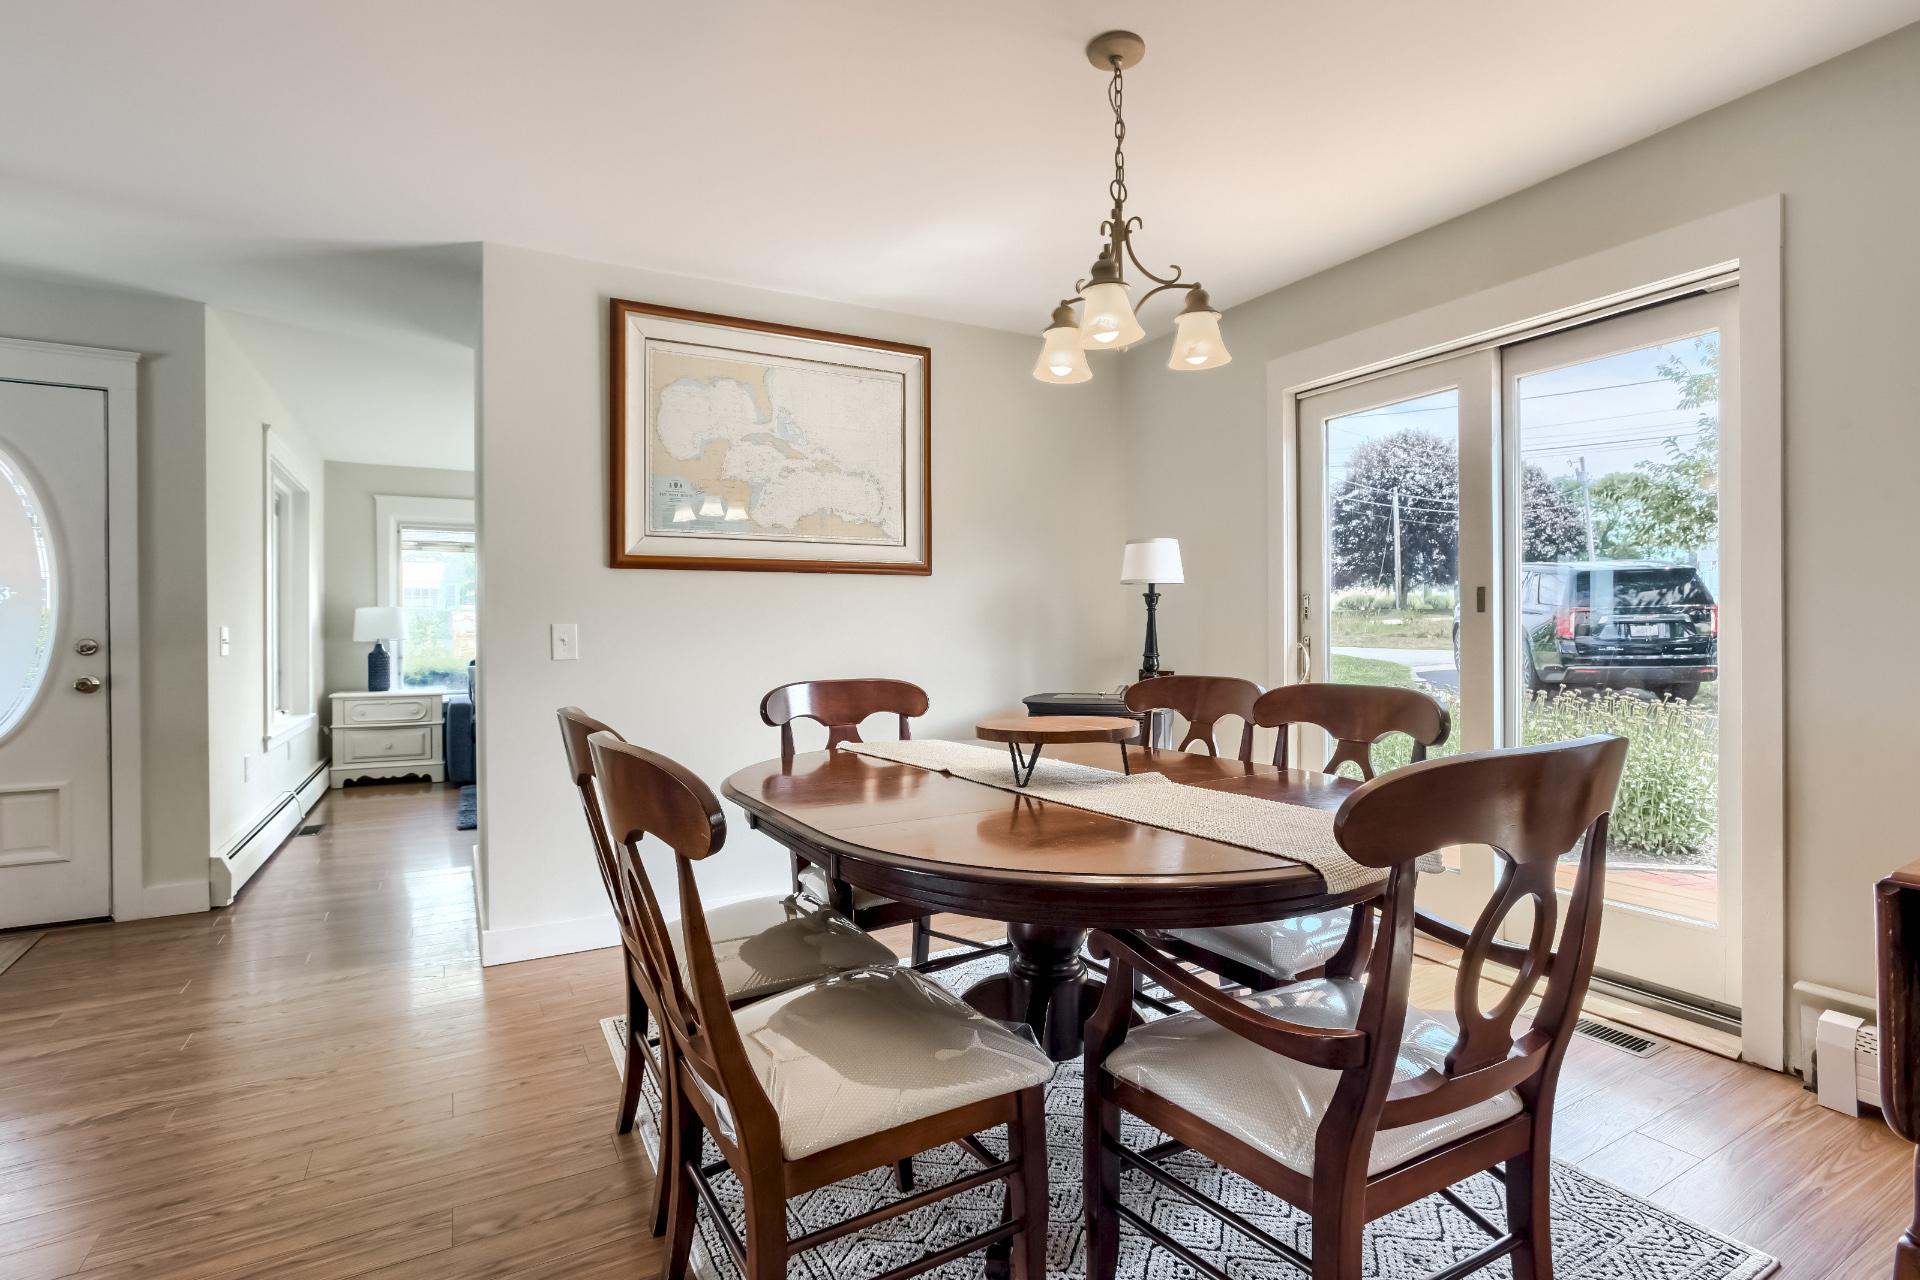 03_Dining_Room_MBP_7727